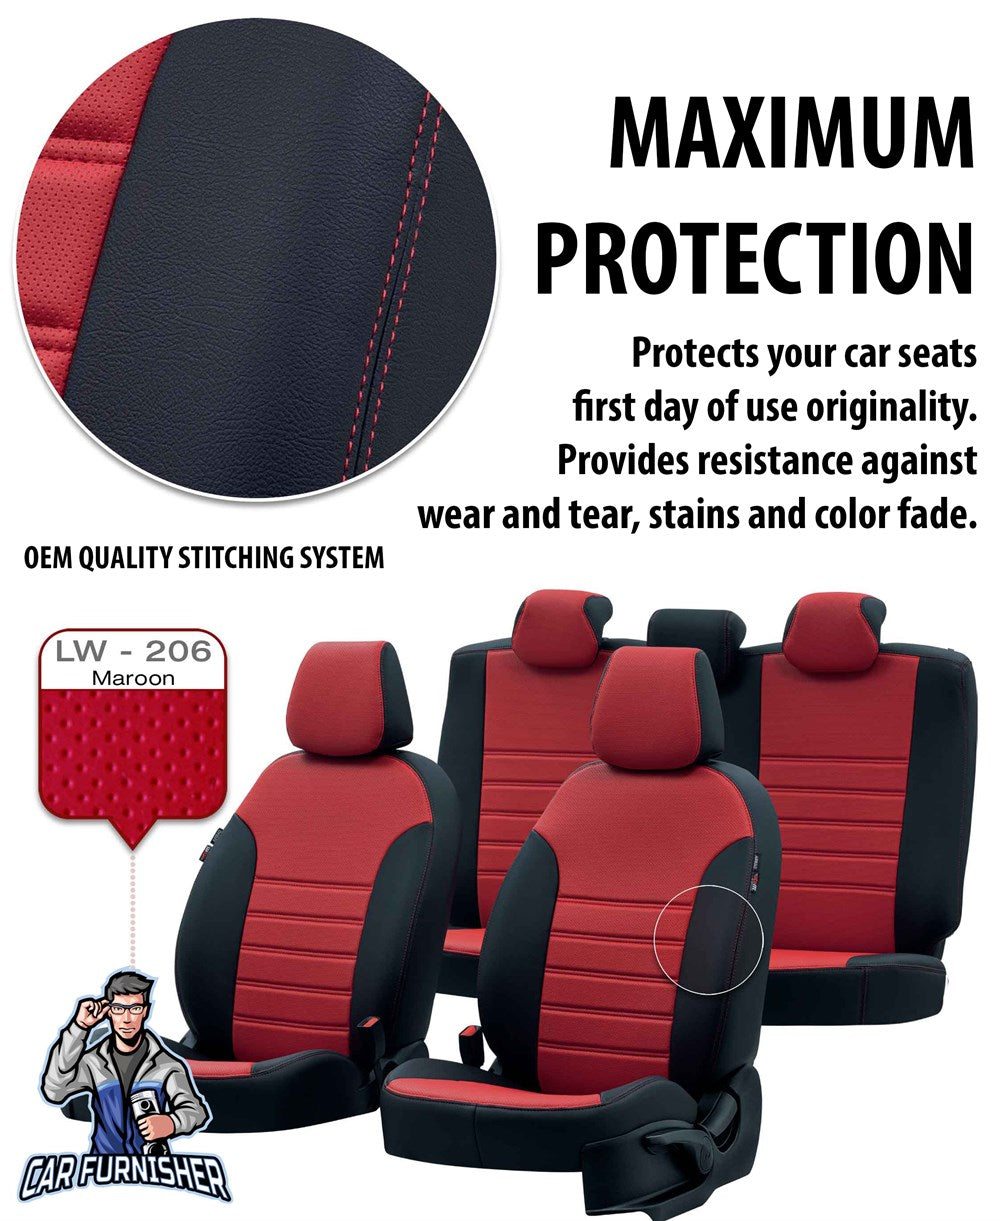 Nissan Navara Seat Covers Istanbul Leather Design Smoked Leather